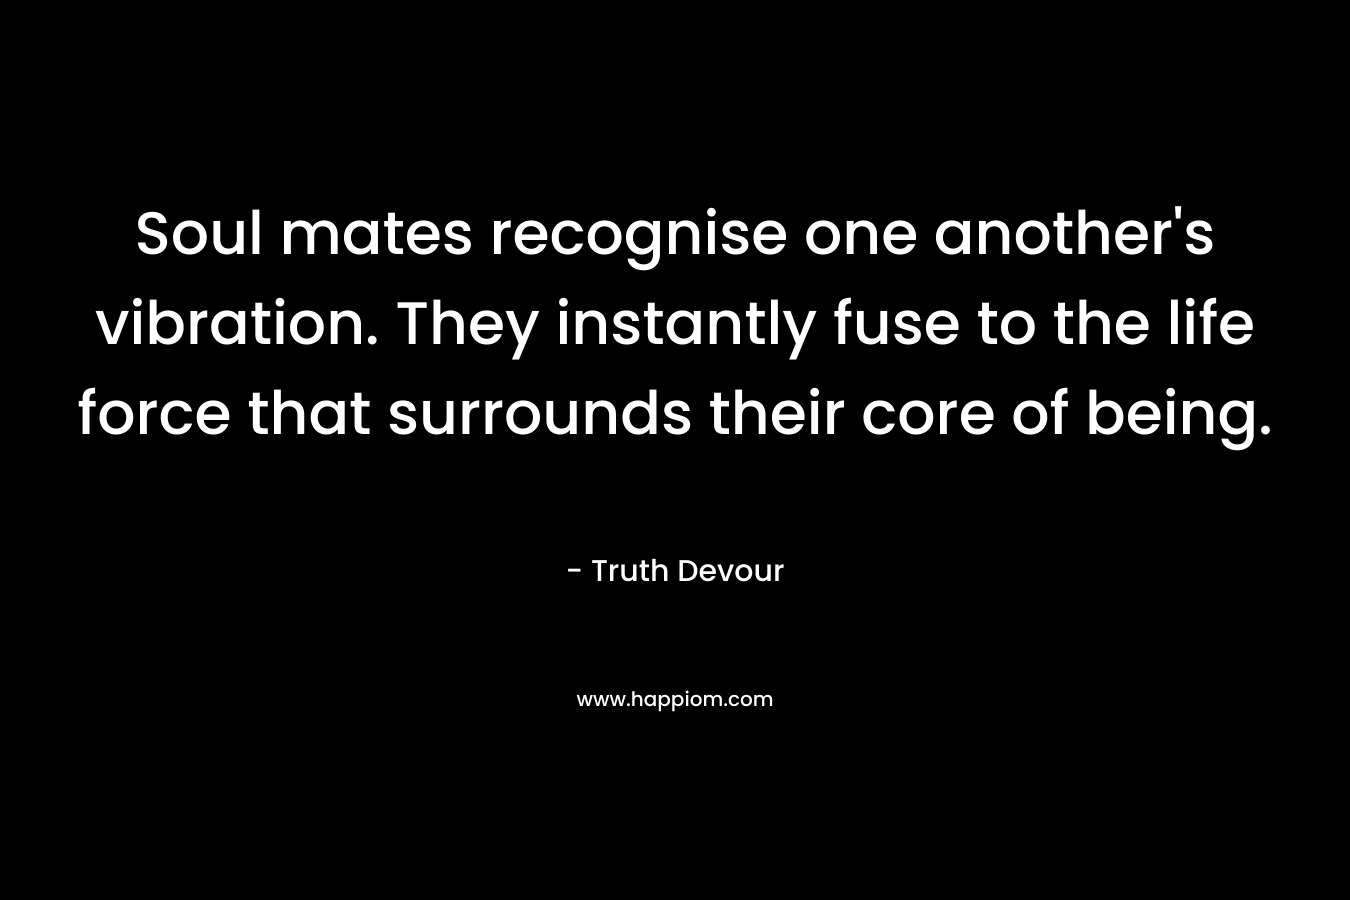 Soul mates recognise one another’s vibration. They instantly fuse to the life force that surrounds their core of being. – Truth Devour